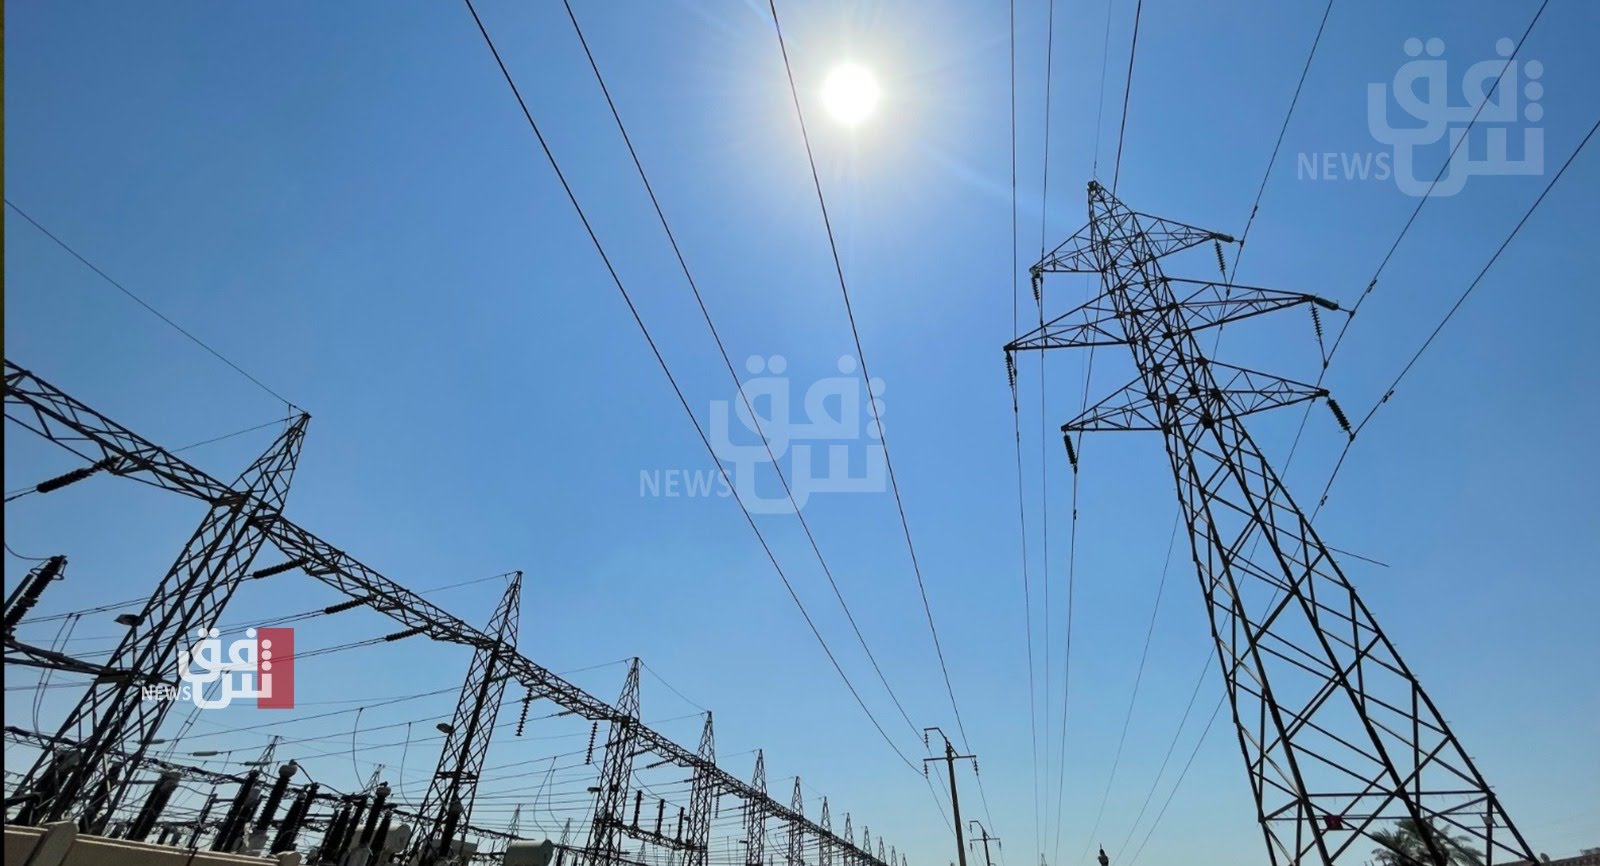 Iraq and Jordan signed electric power linkage agreement